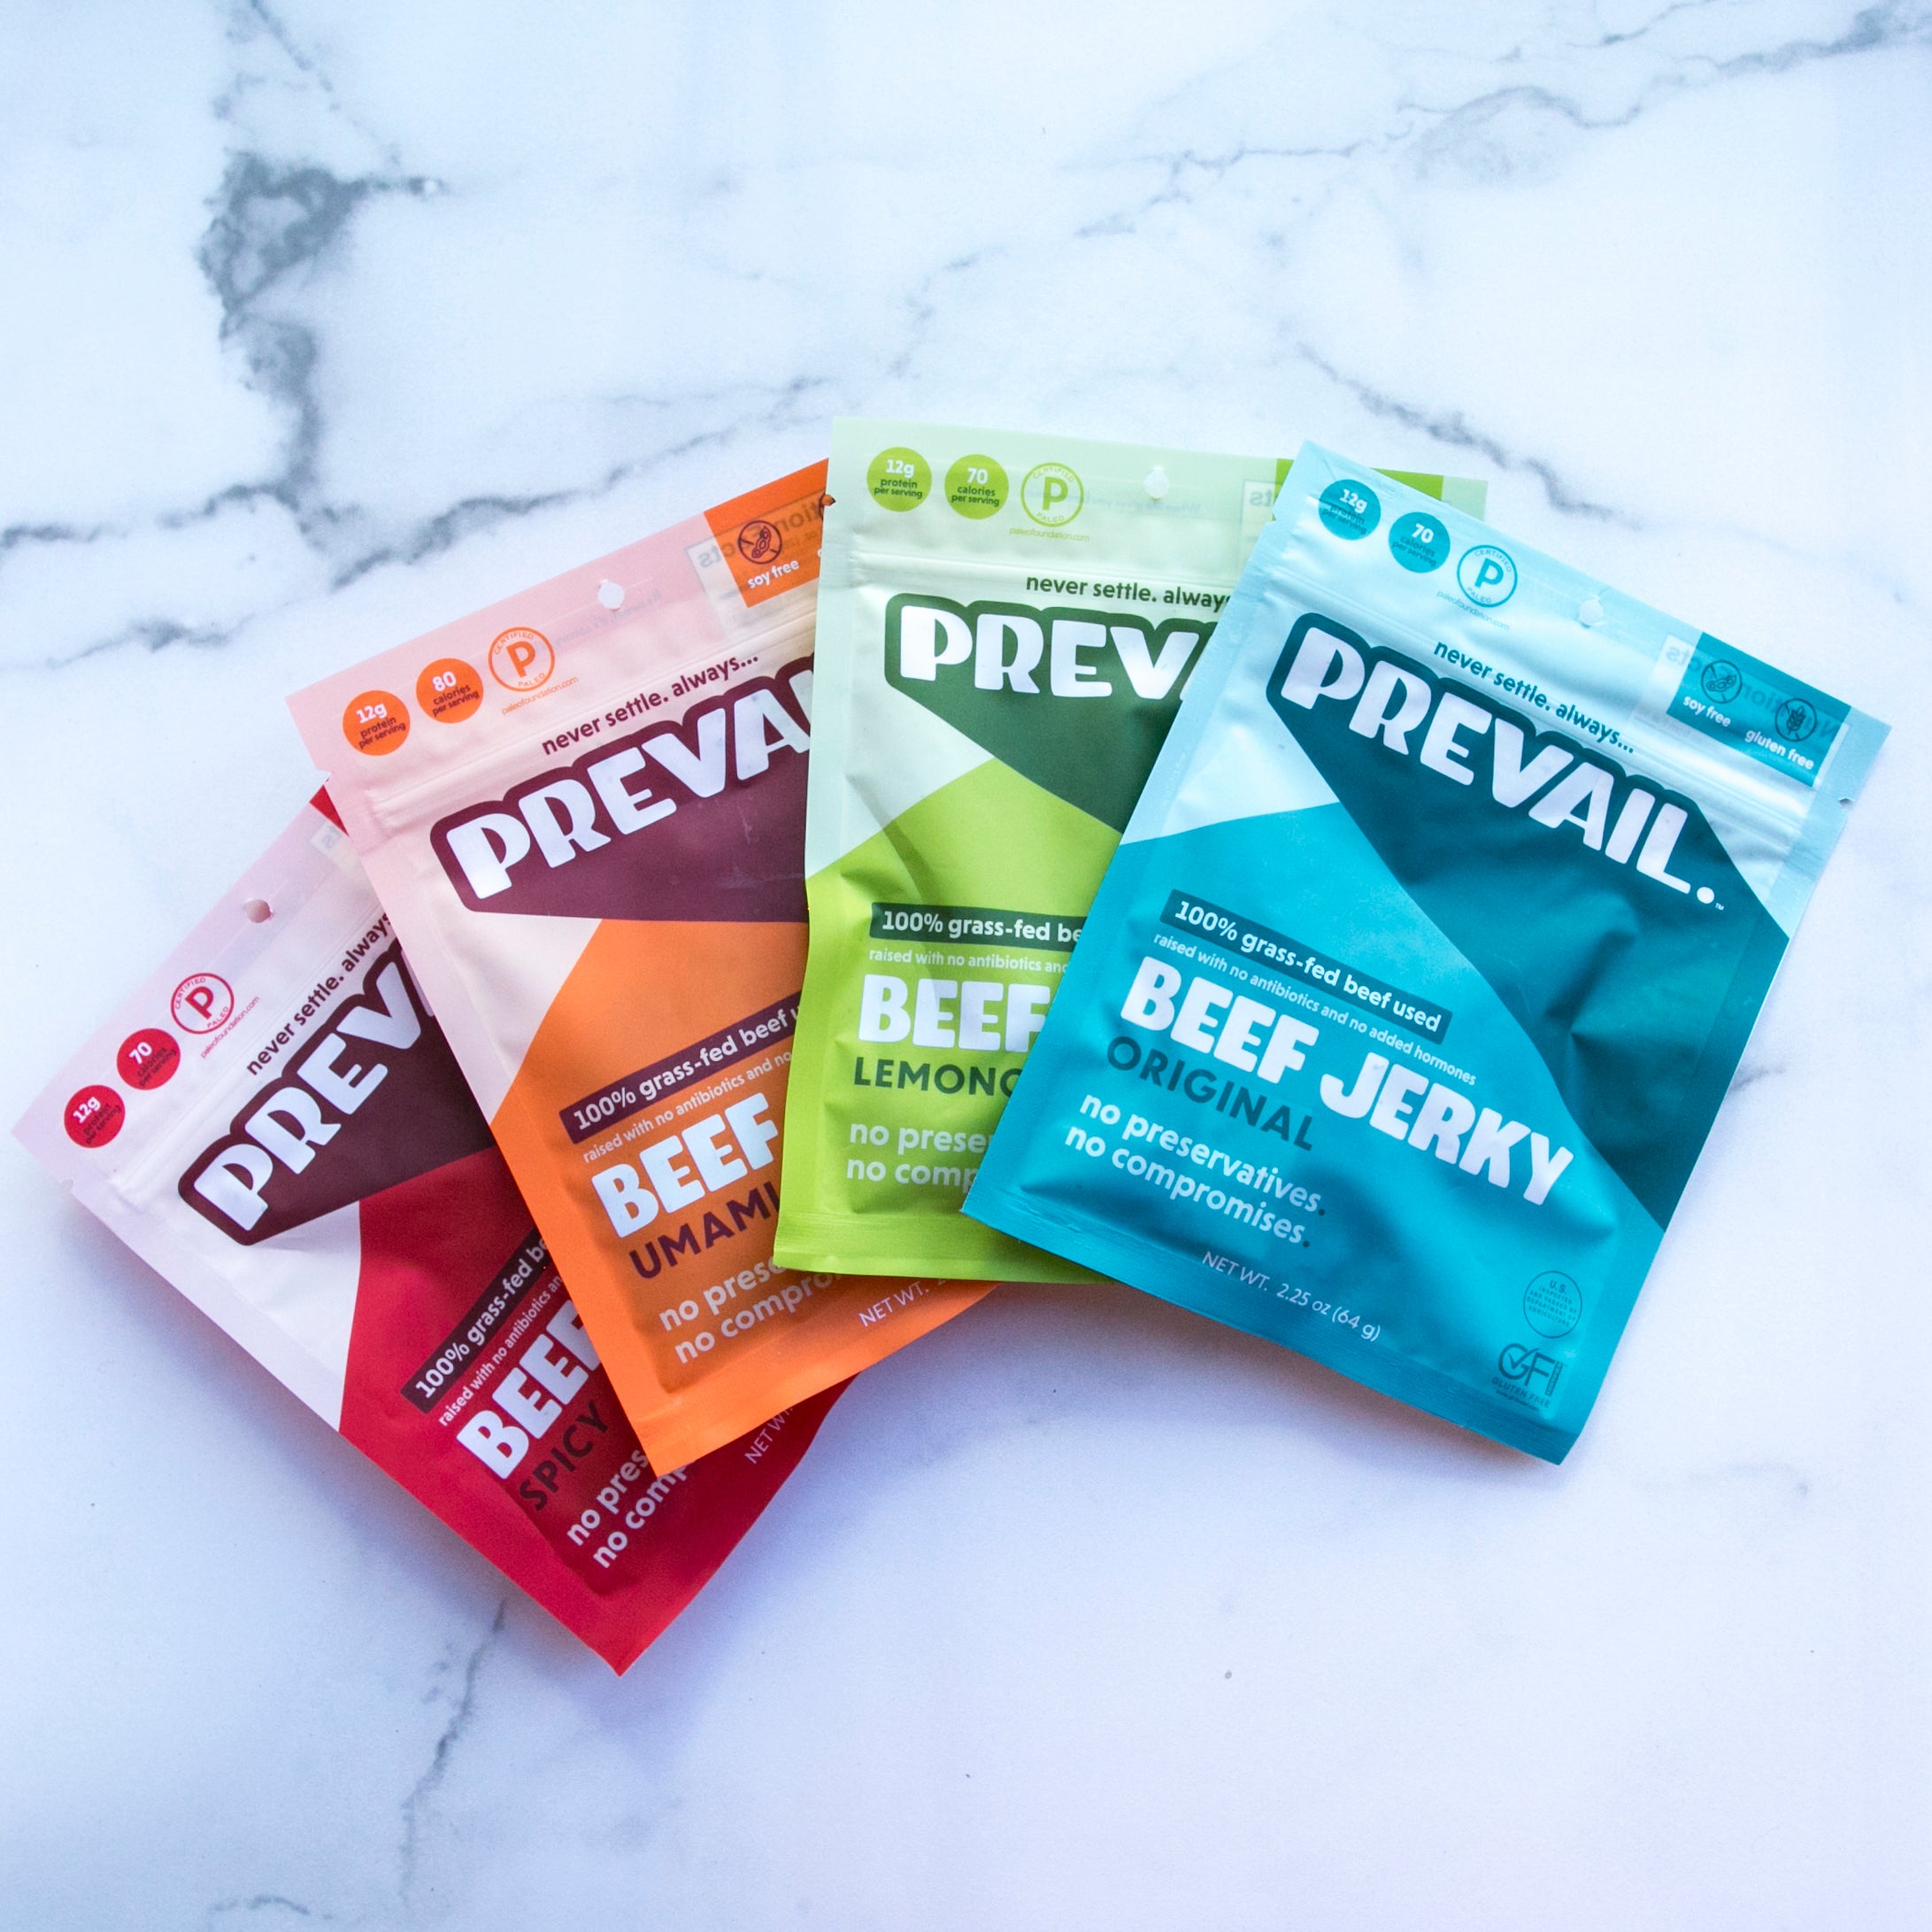 PREVAIL Beef Jerky: The Healthiest Beef Jerky Option For You